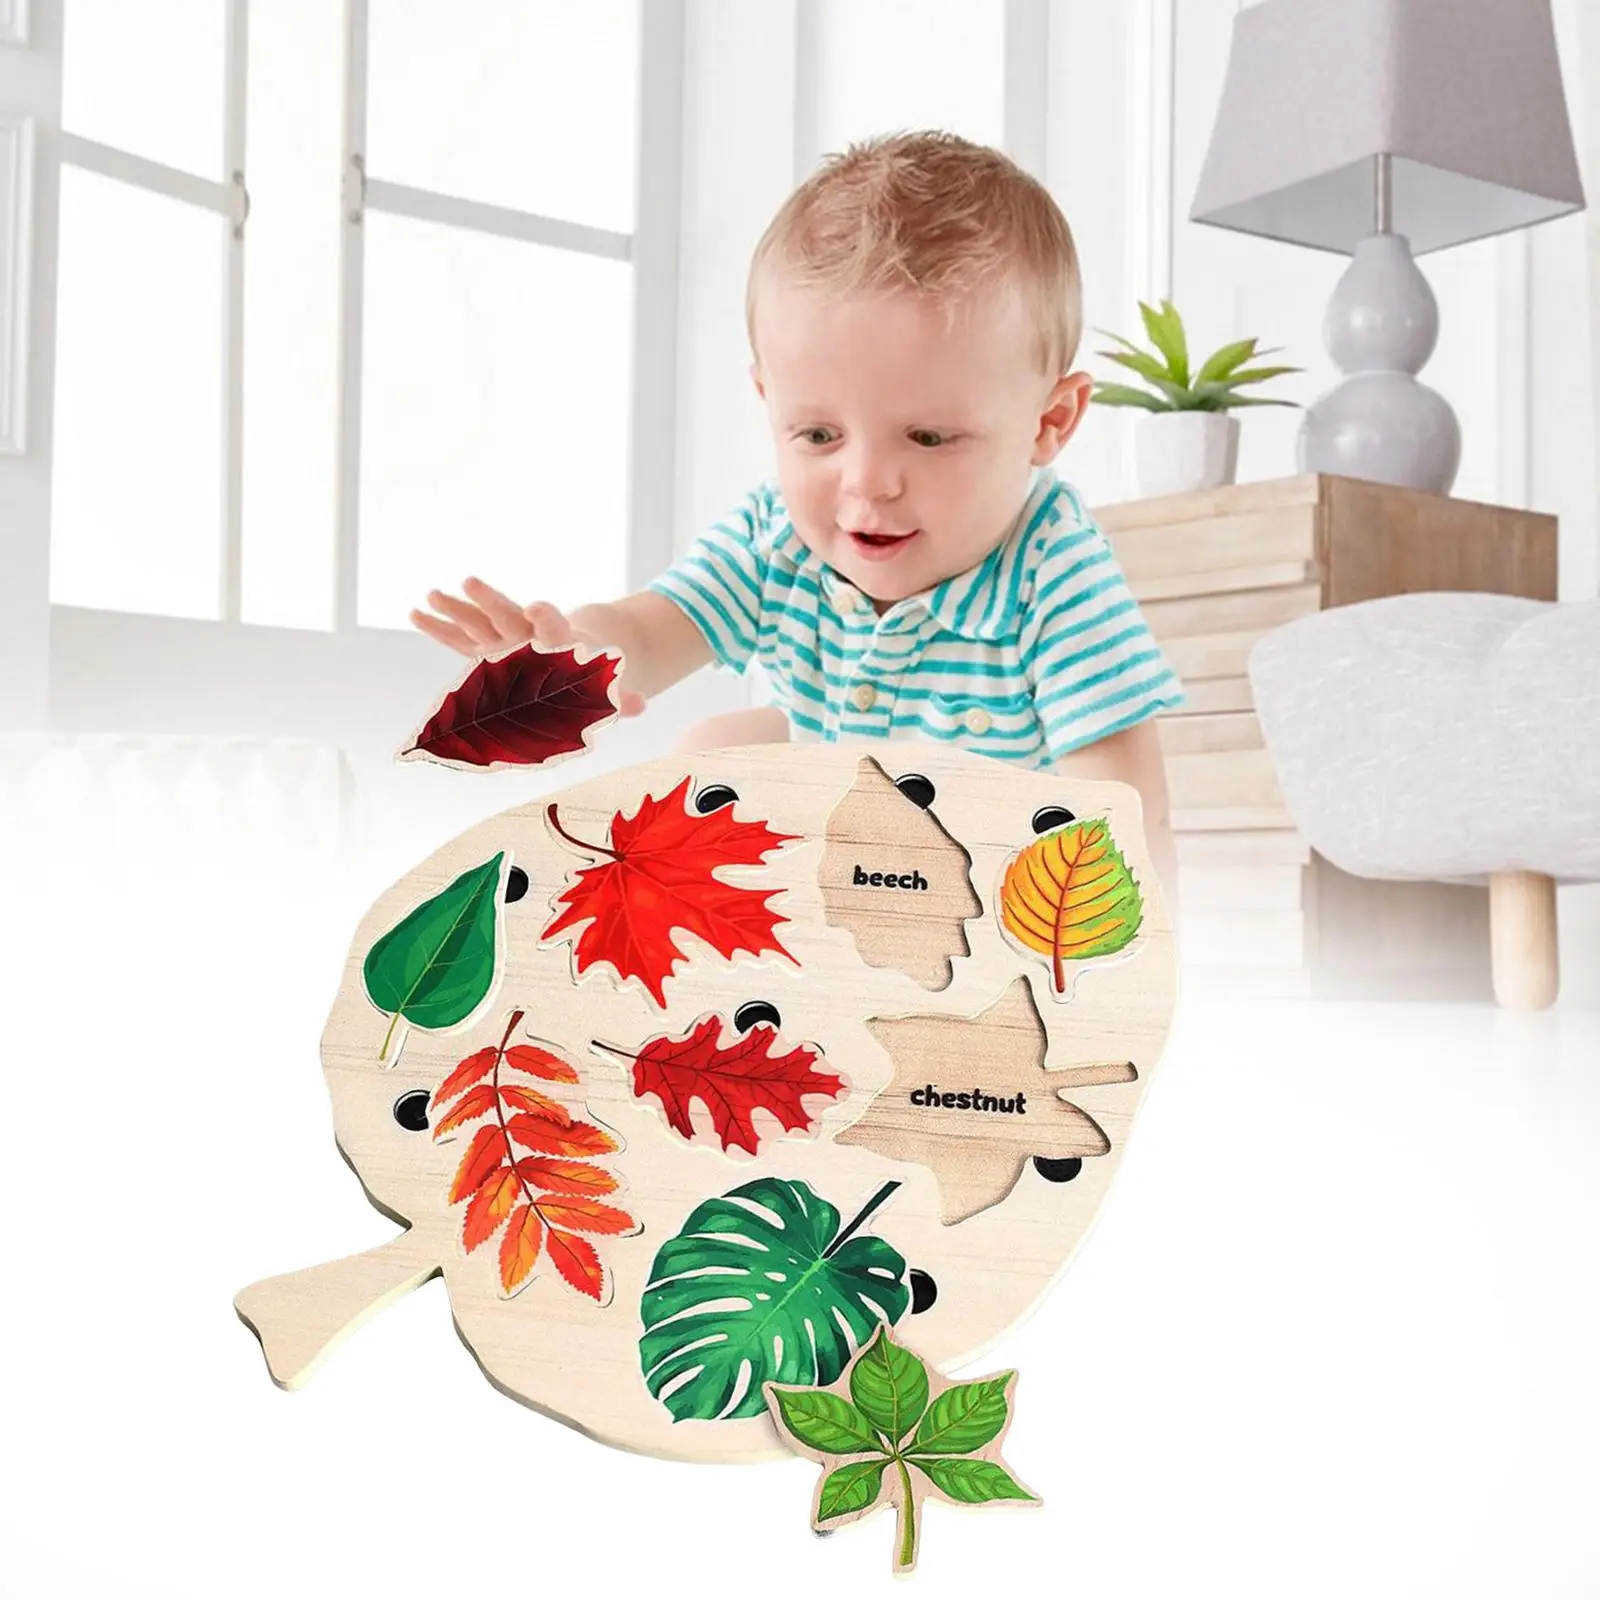 

Wooden Jigsaw Puzzles Preschool Early Educational Toys Development Toys Learning Leaf Puzzle Montessori Toy for 3 4 5 6 Year Old